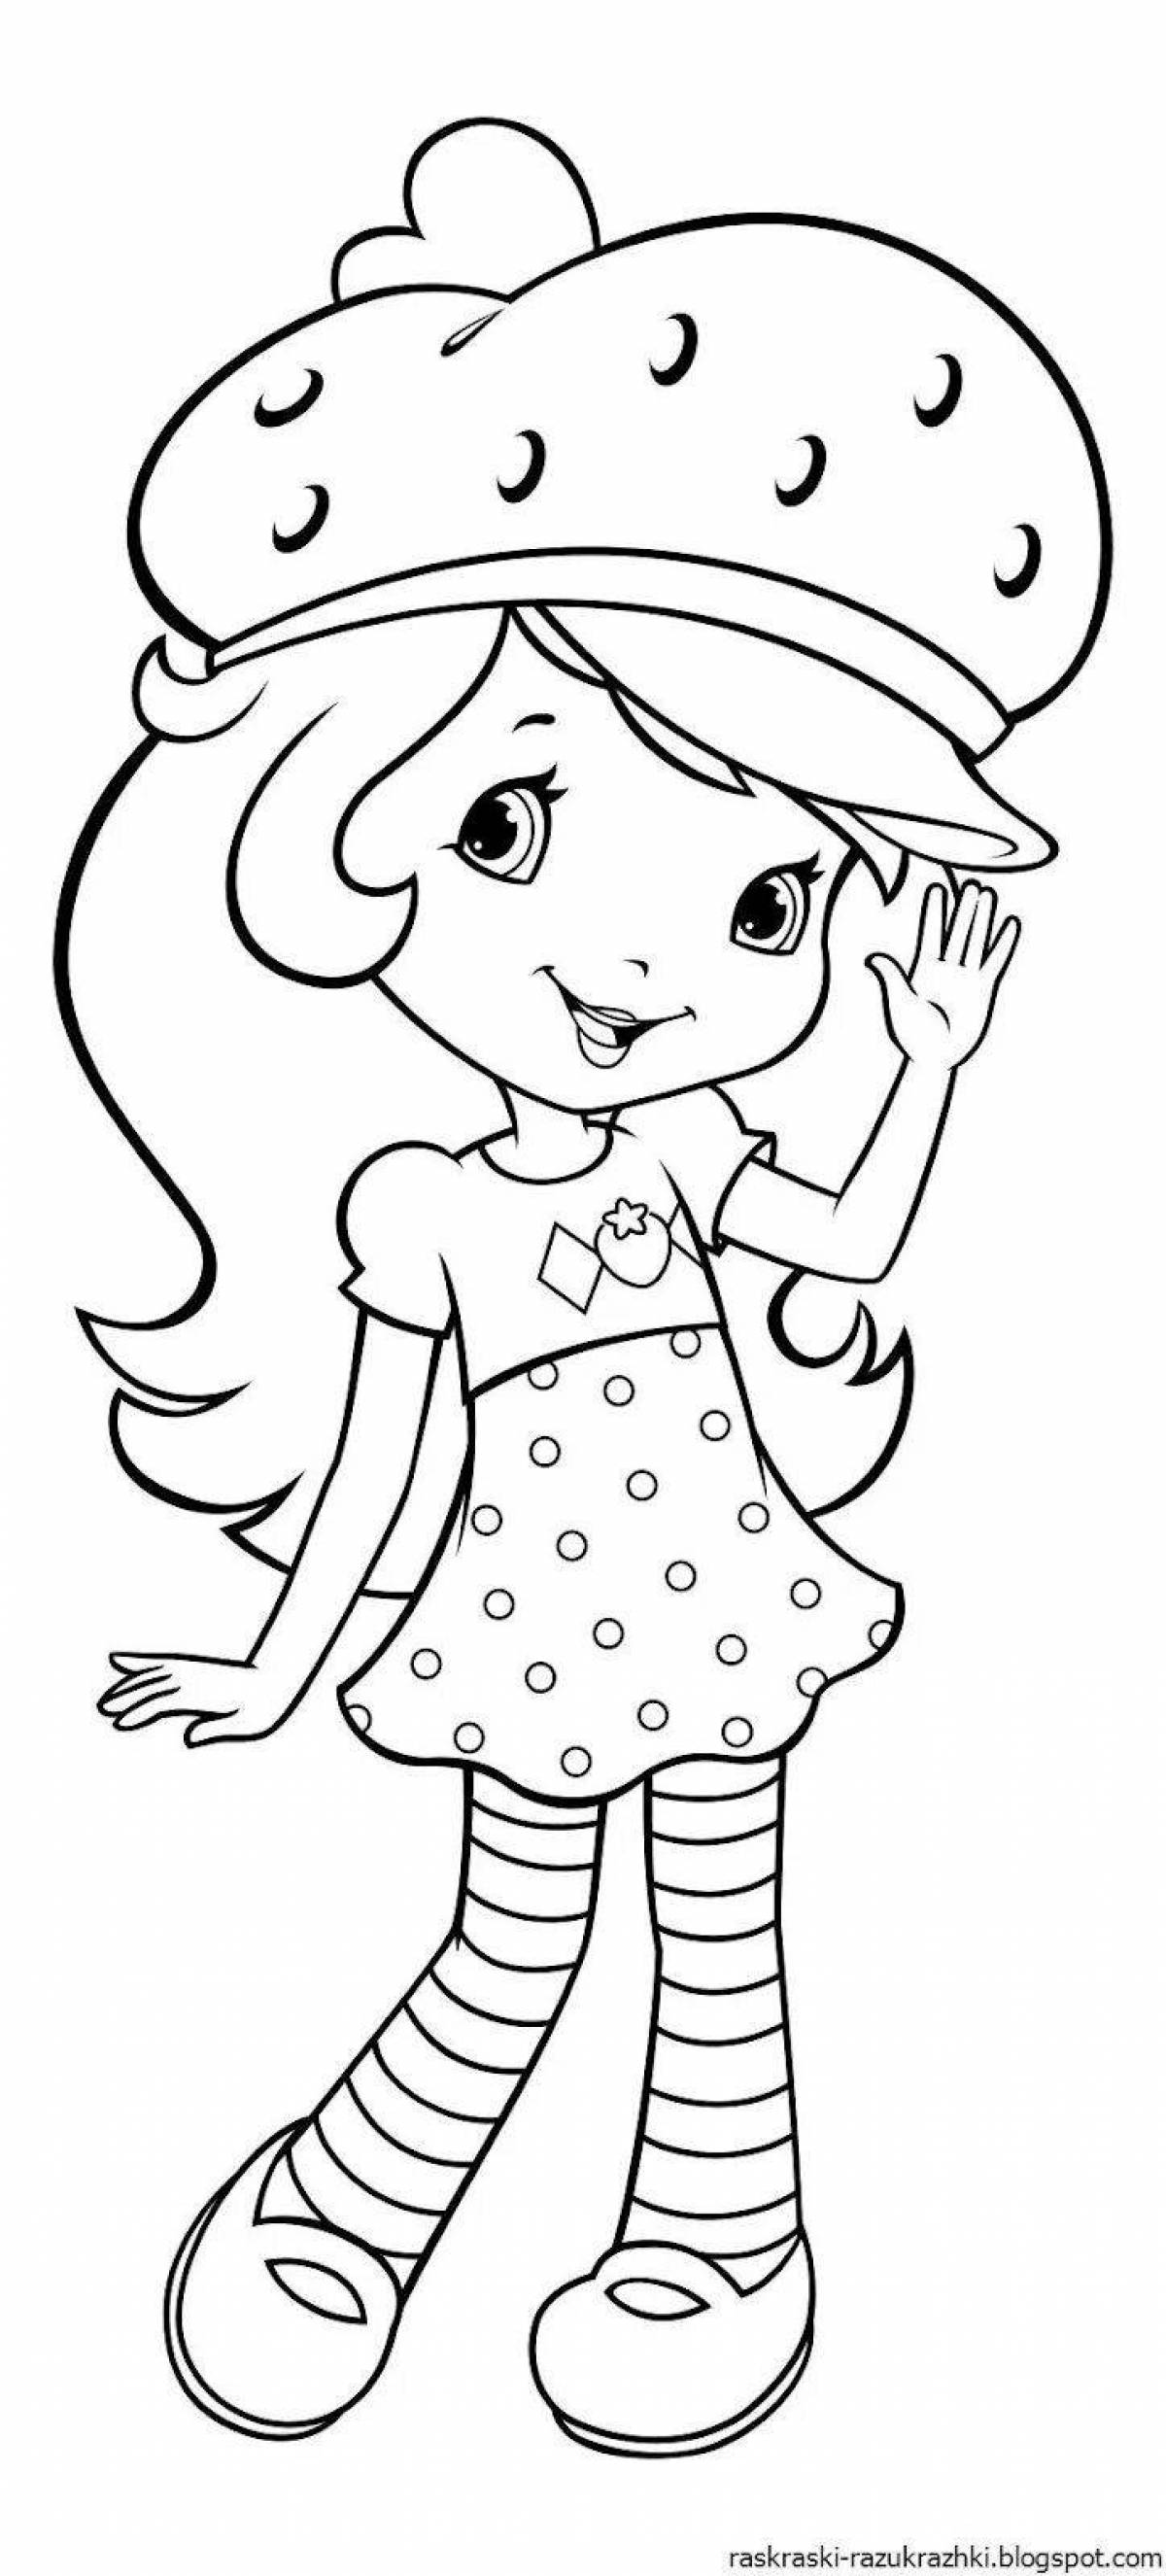 Sweet strawberry girl coloring book